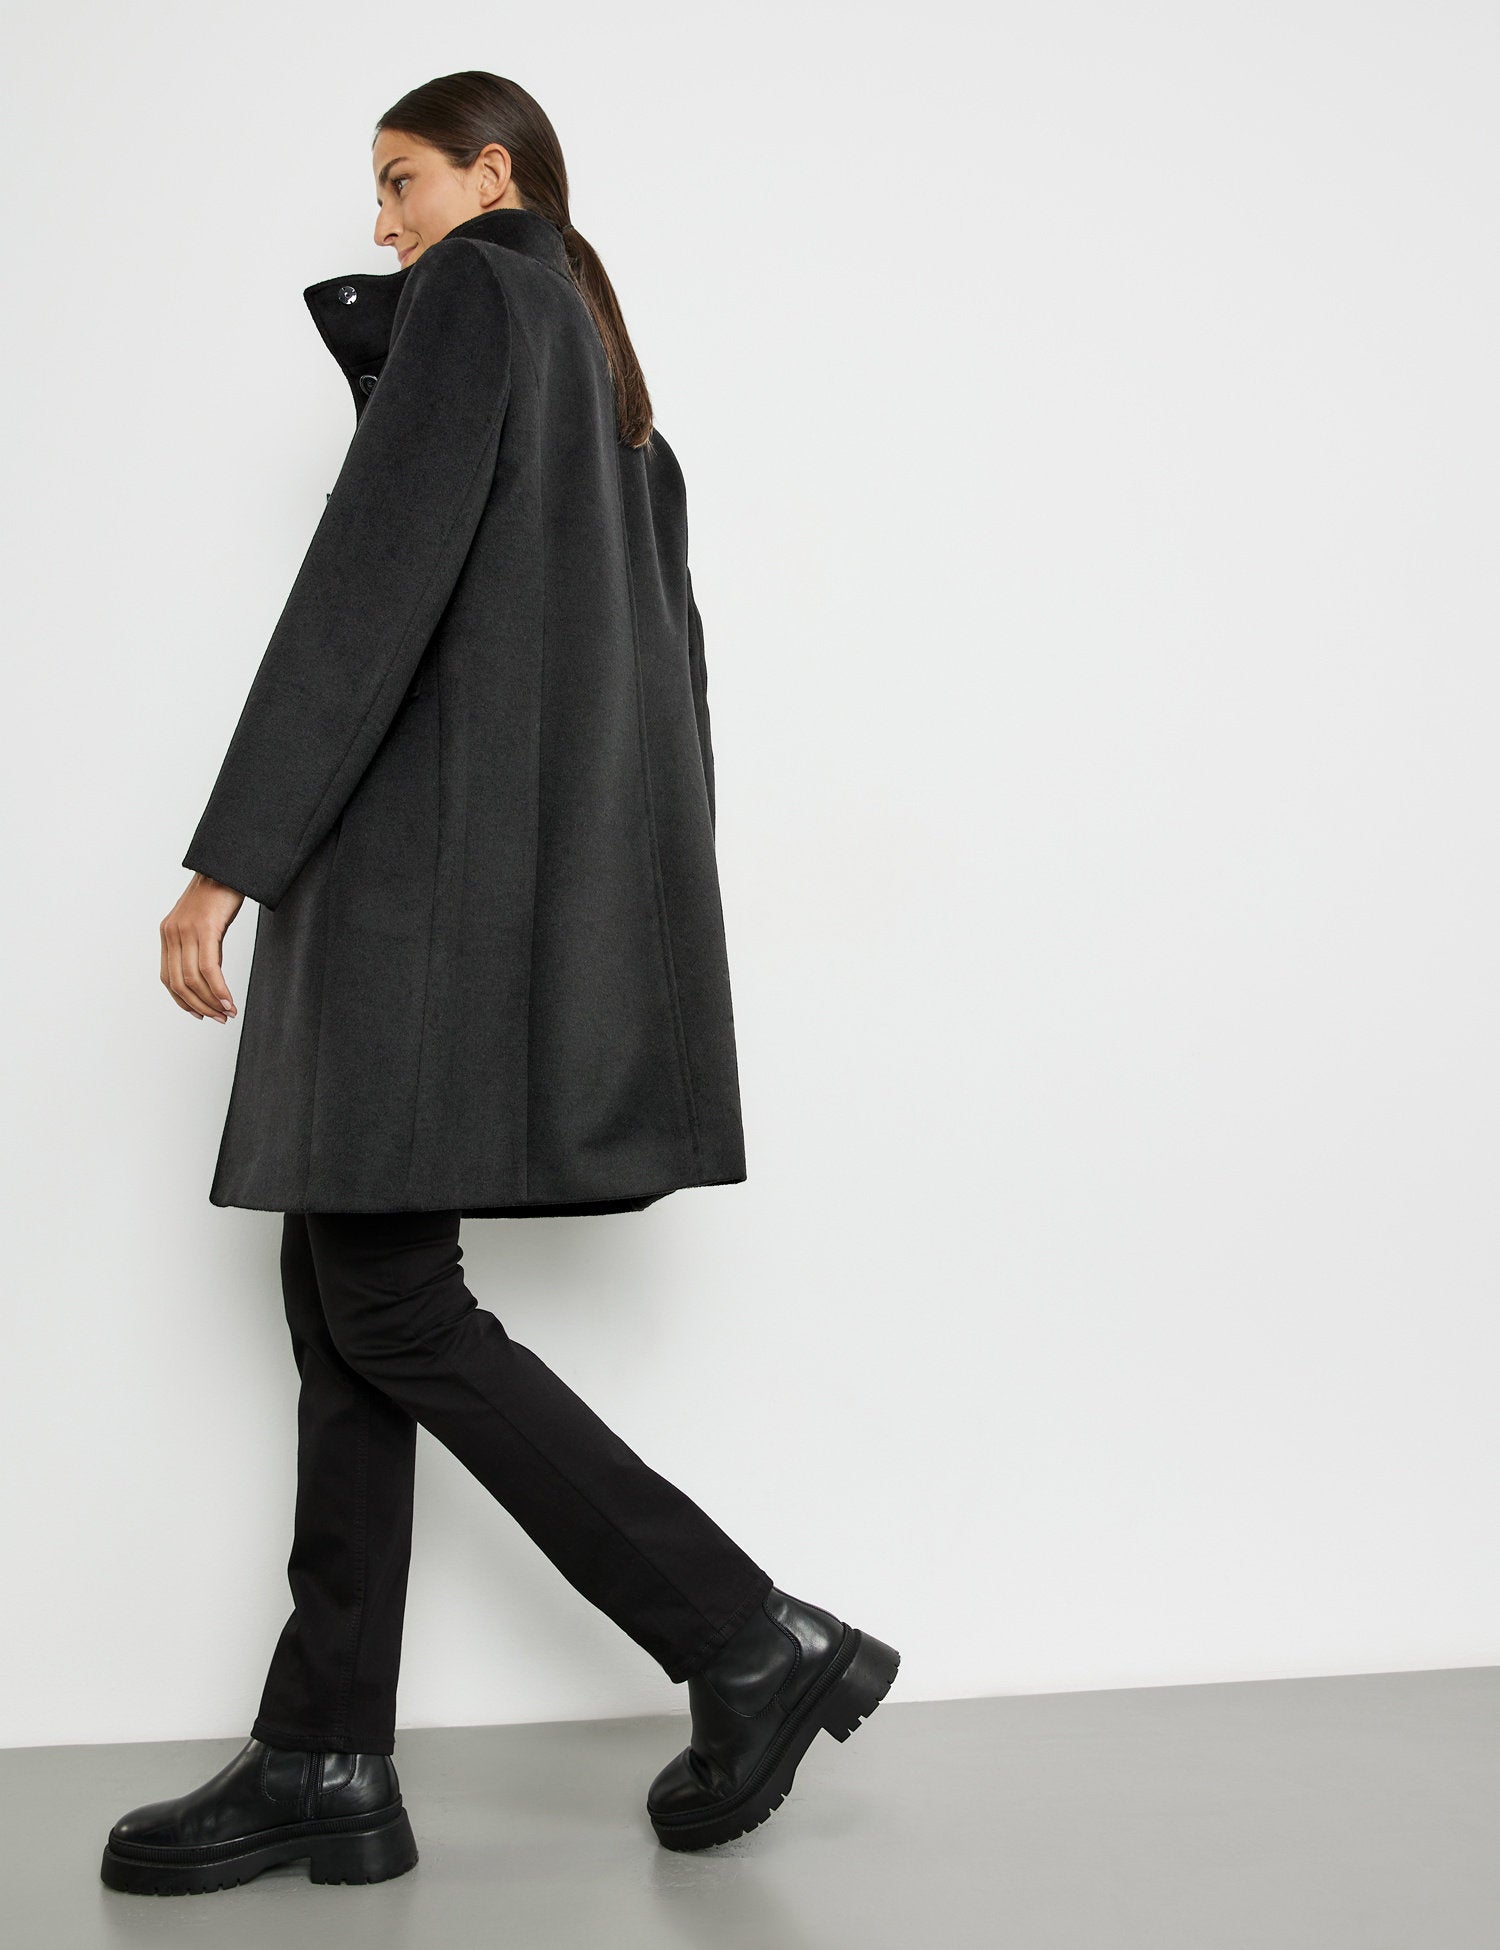 Short Wool Coat With A Stand Up Collar_250235-31131_11000_05